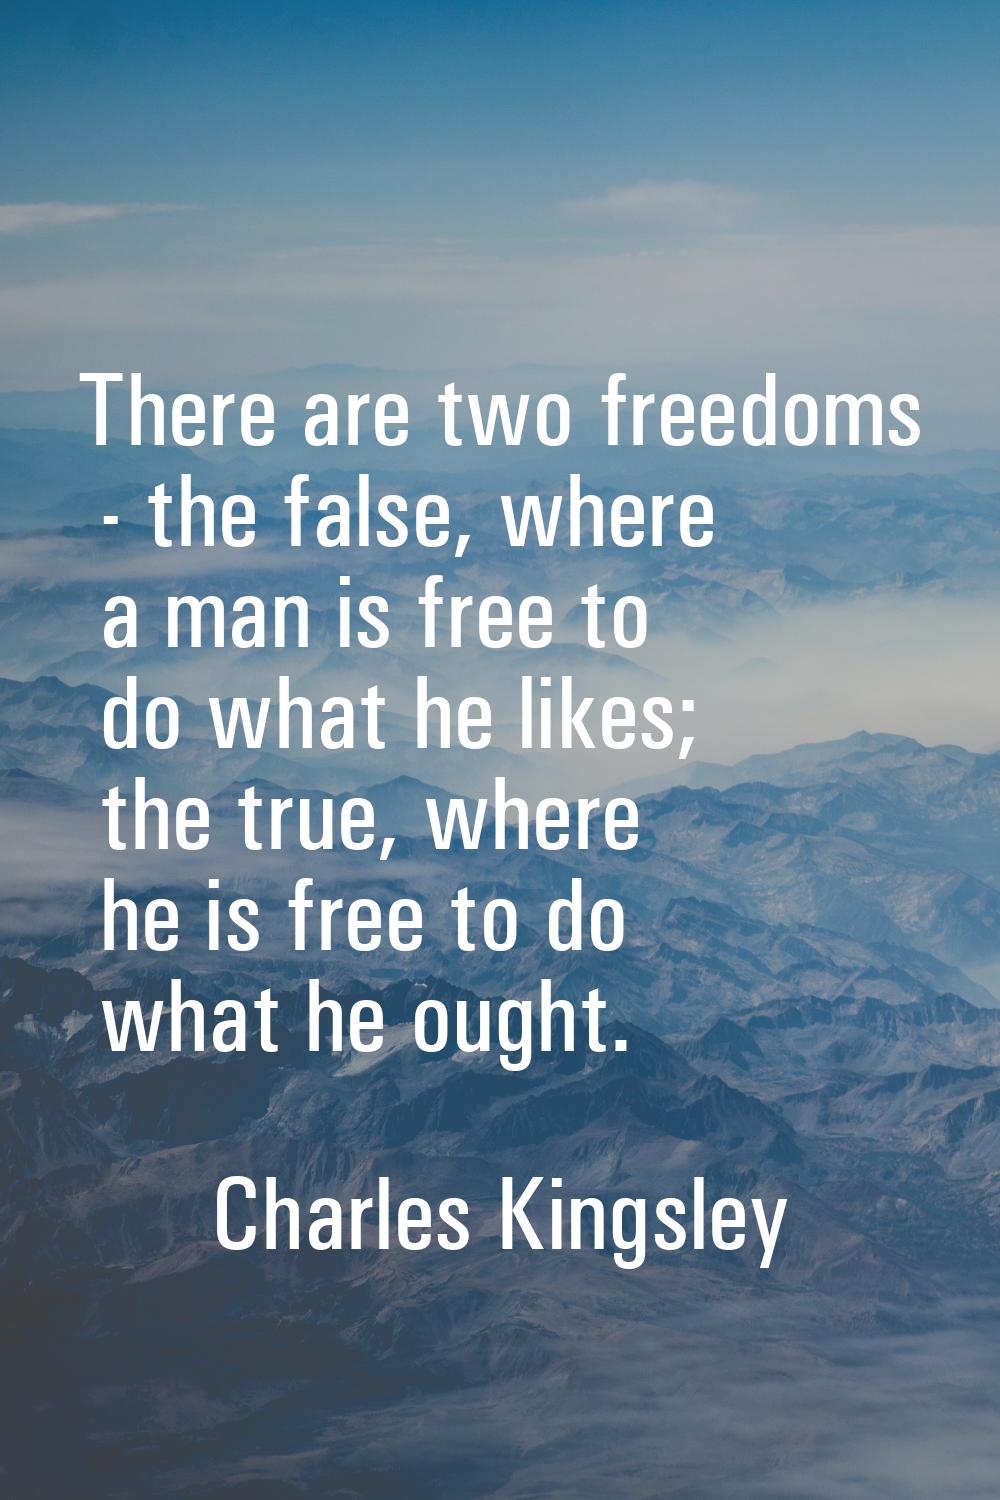 There are two freedoms - the false, where a man is free to do what he likes; the true, where he is 